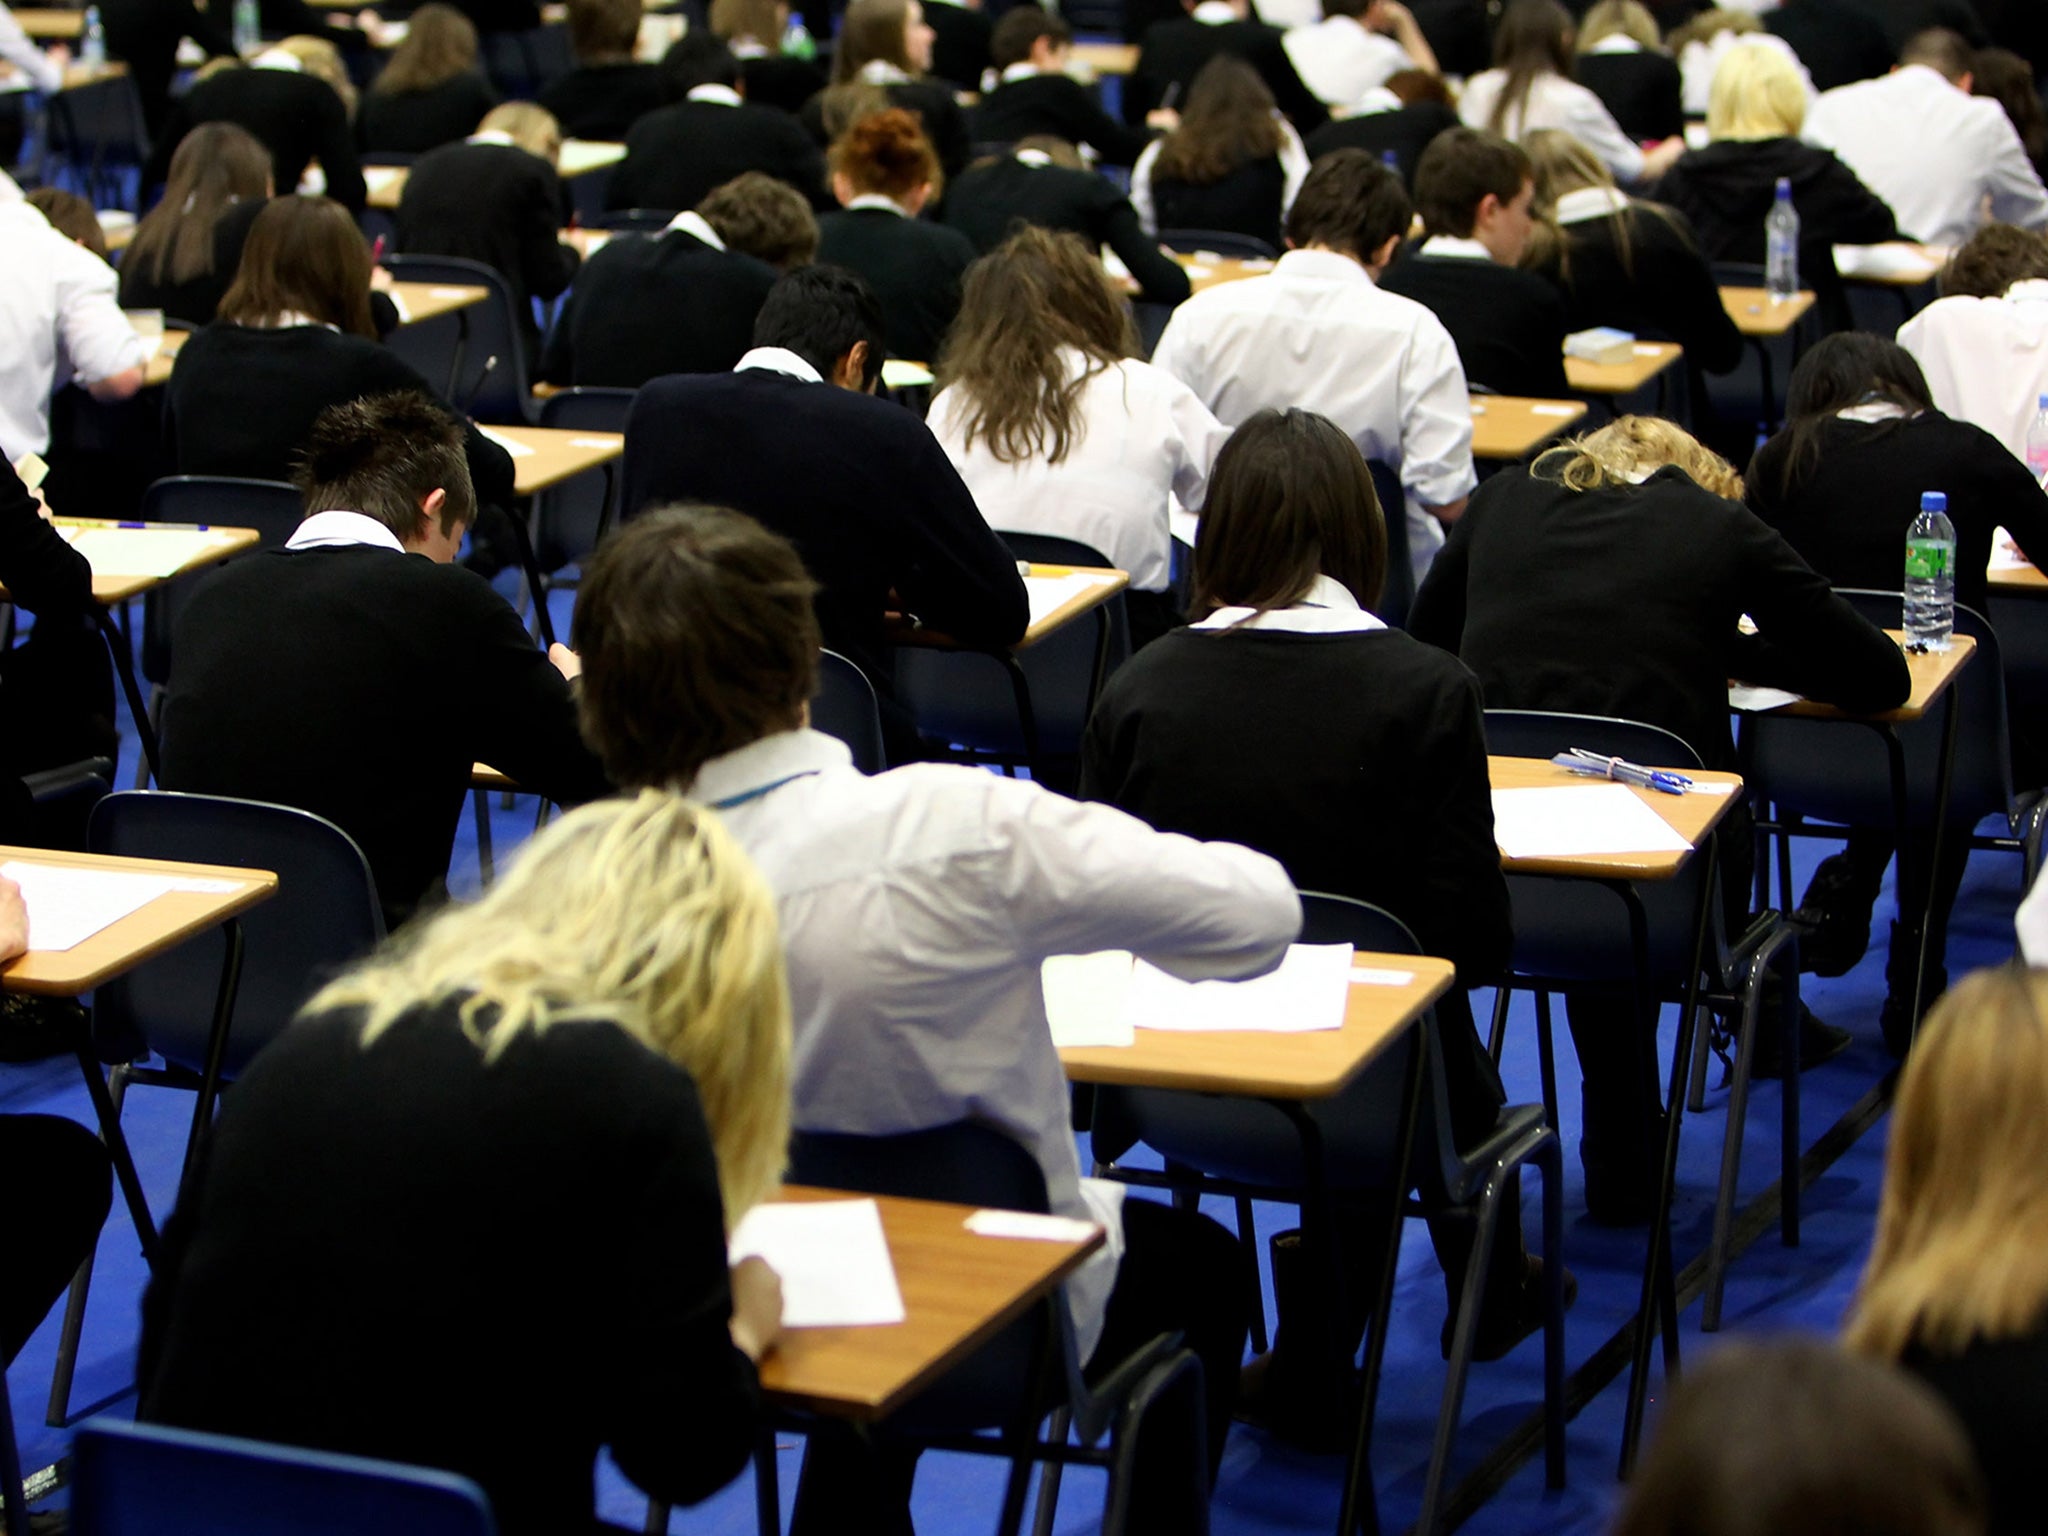 OCR came close to miss A-level and GCSE results